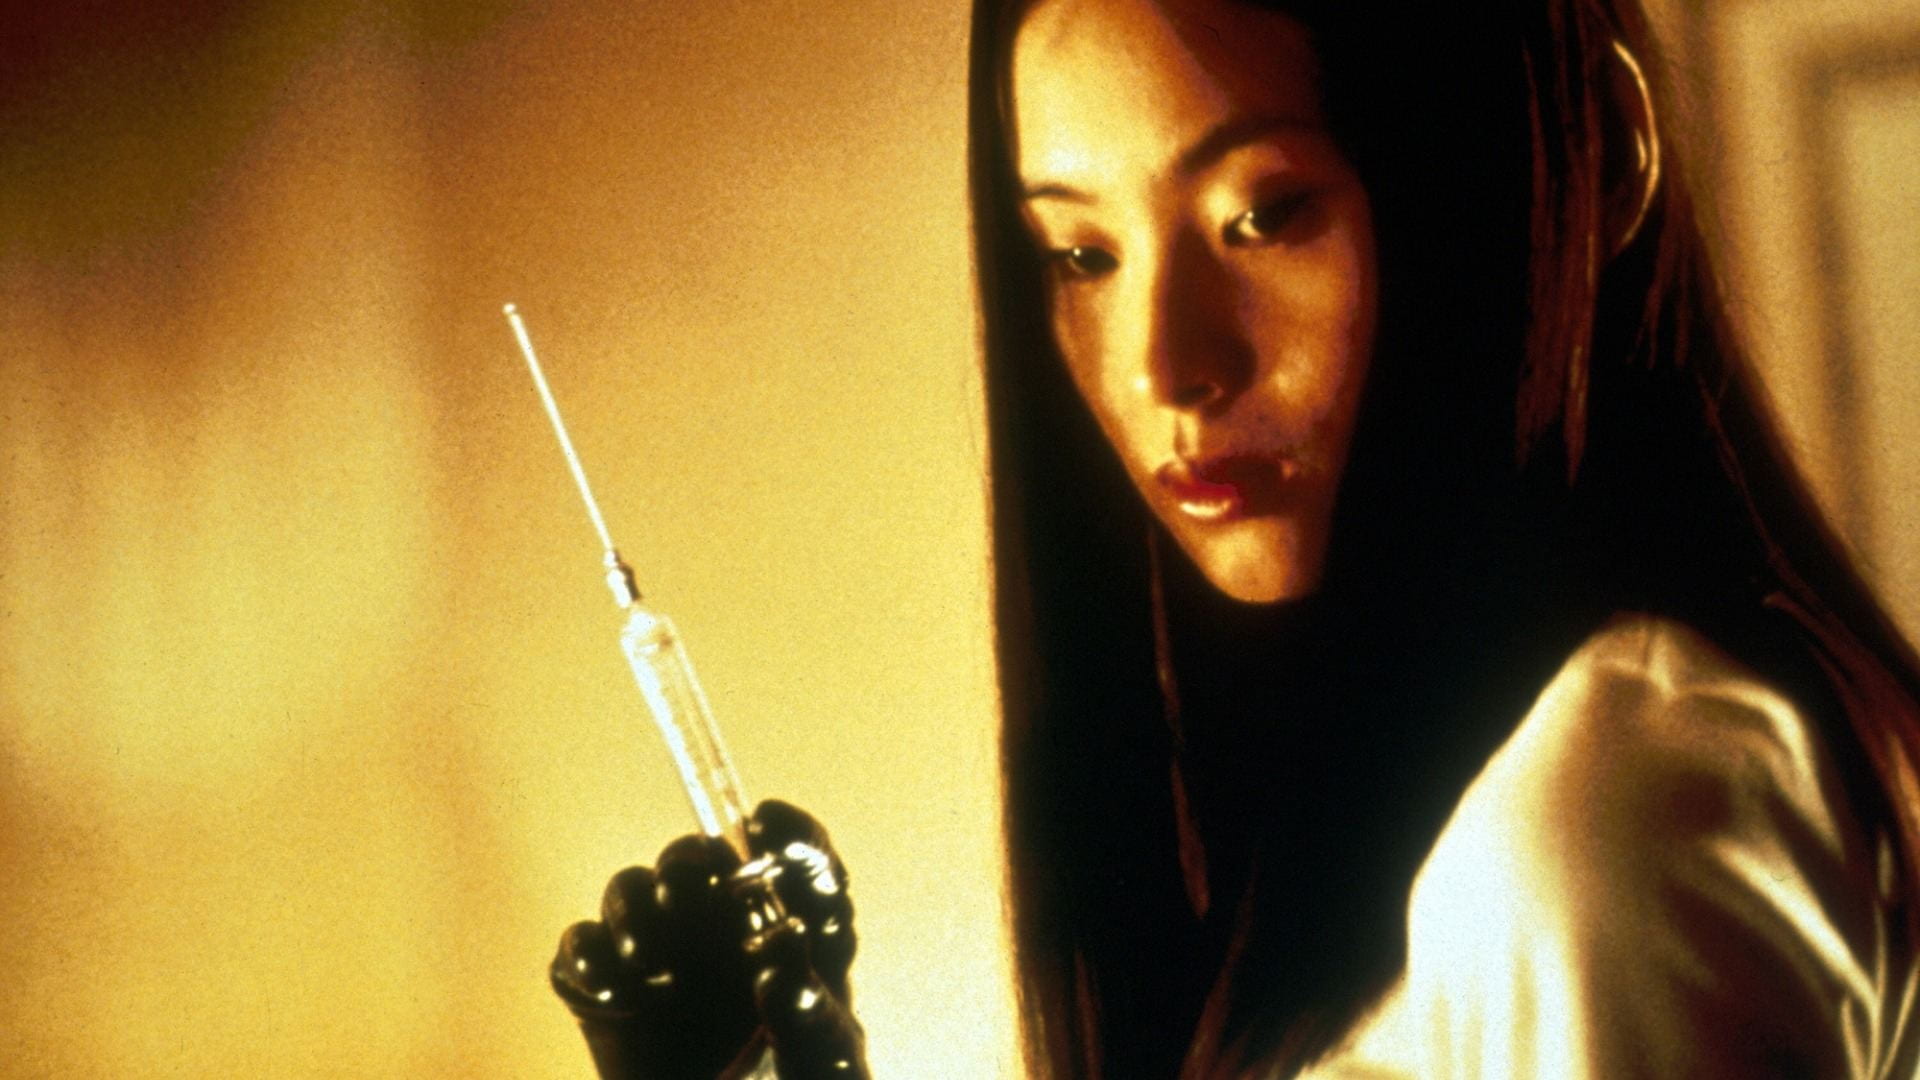 A young woman looks down and holds up a syringe with a long needle